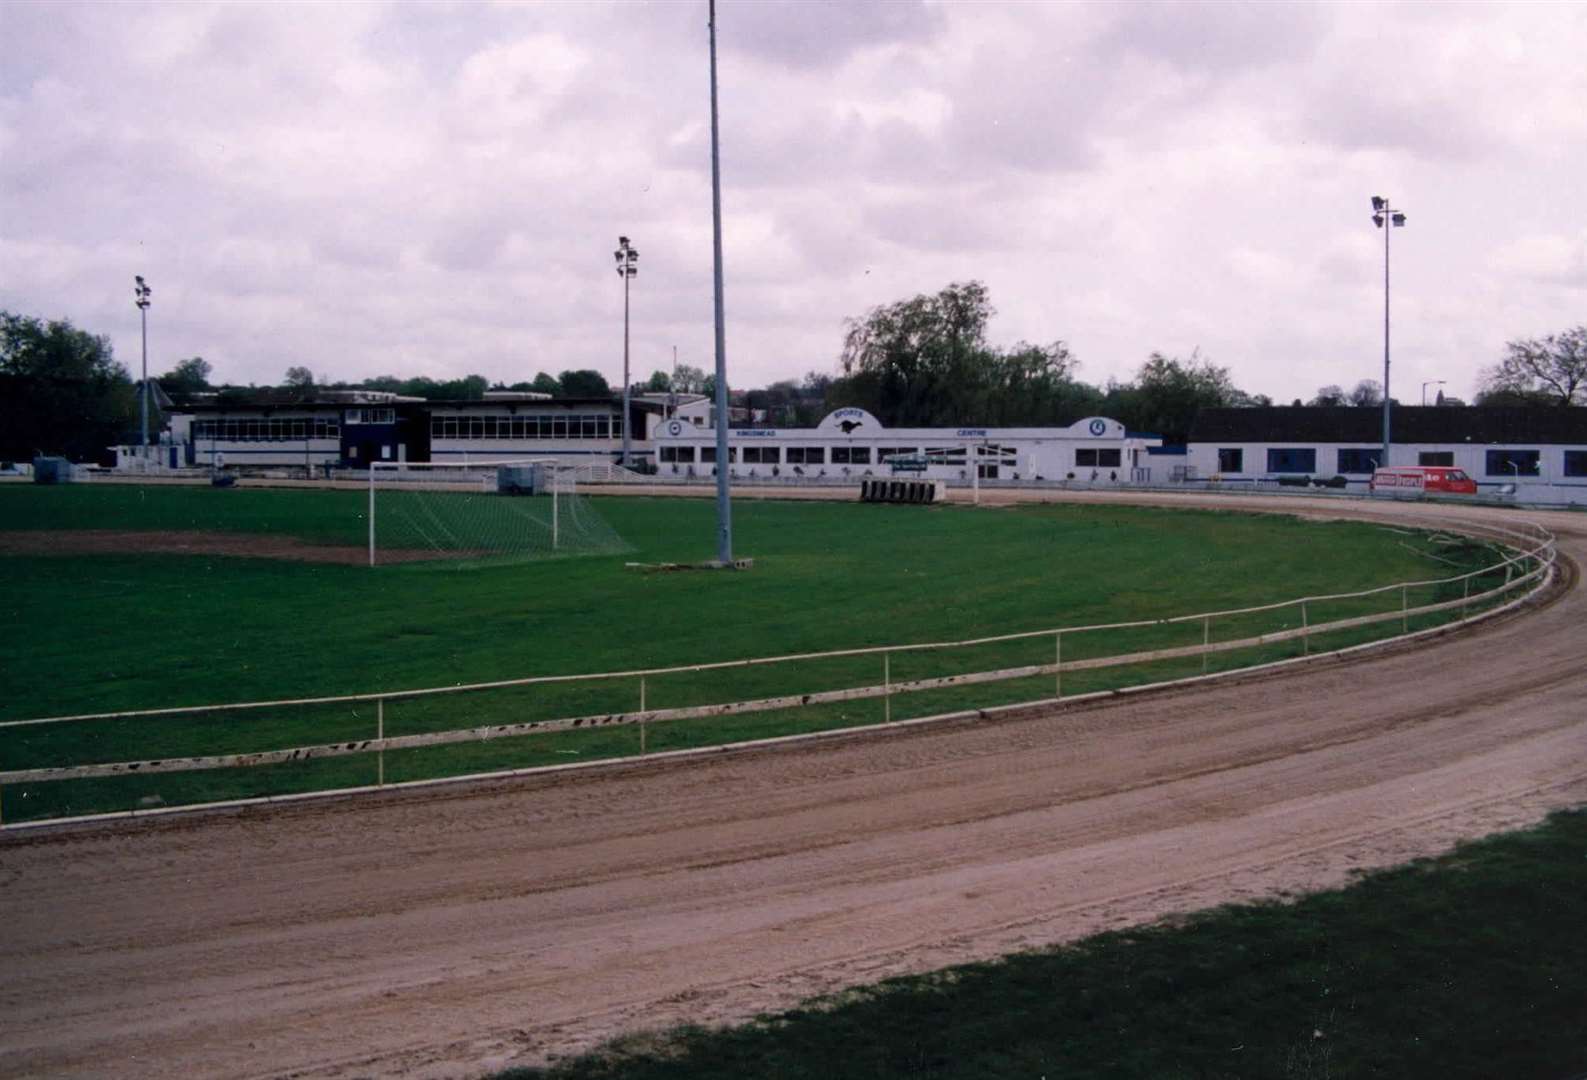 Kingsmead Stadium in 1992 - once home to Canterbury City FC